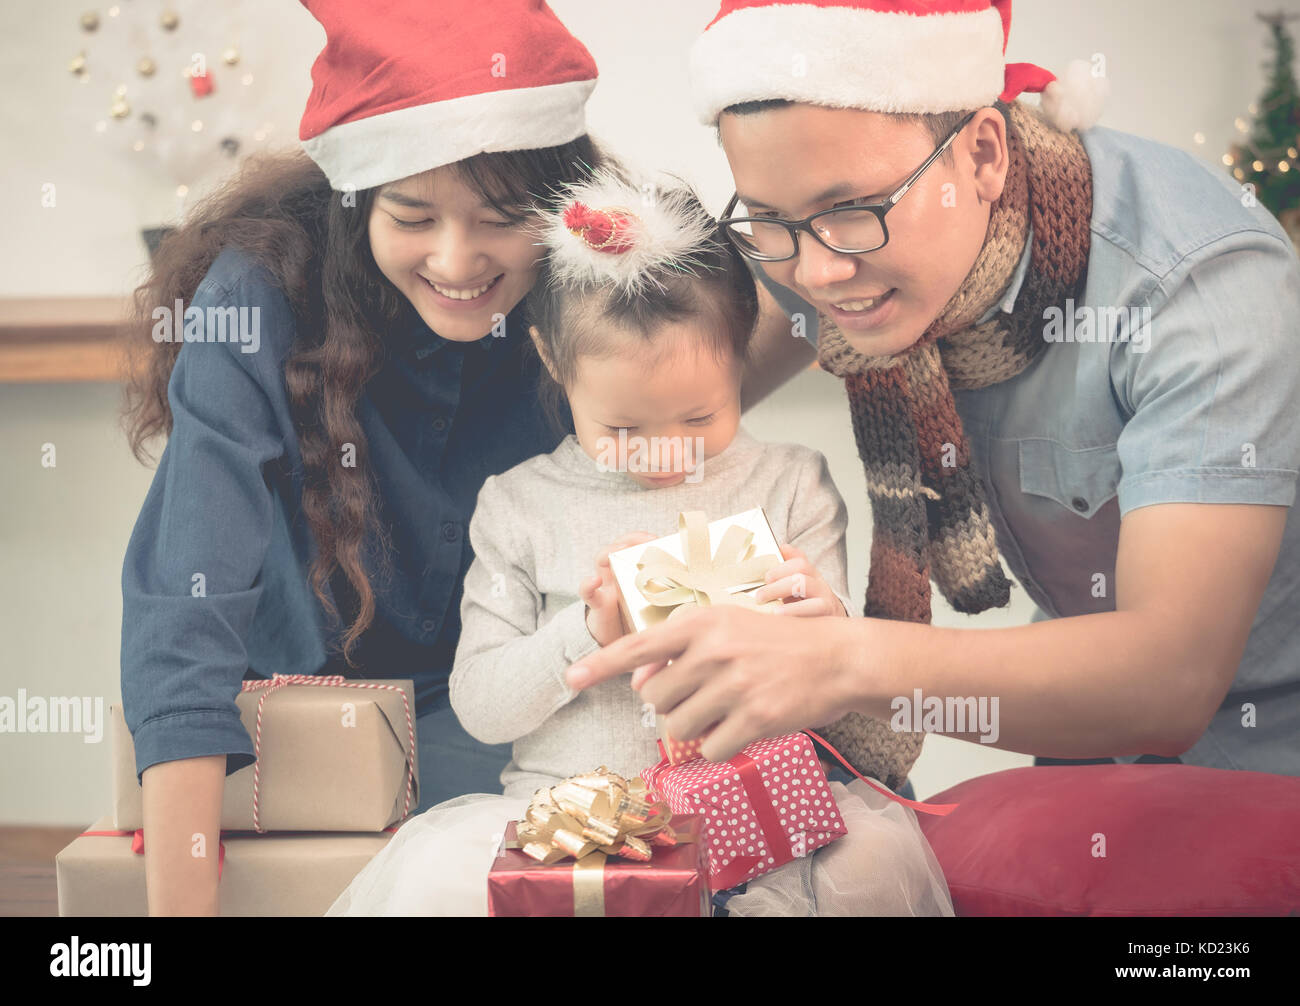 Happy family Asia family wear santa claus hat unwrap Christmas gift box at house xmas party,Holiday celebrating festive concept,vintage filter Stock Photo